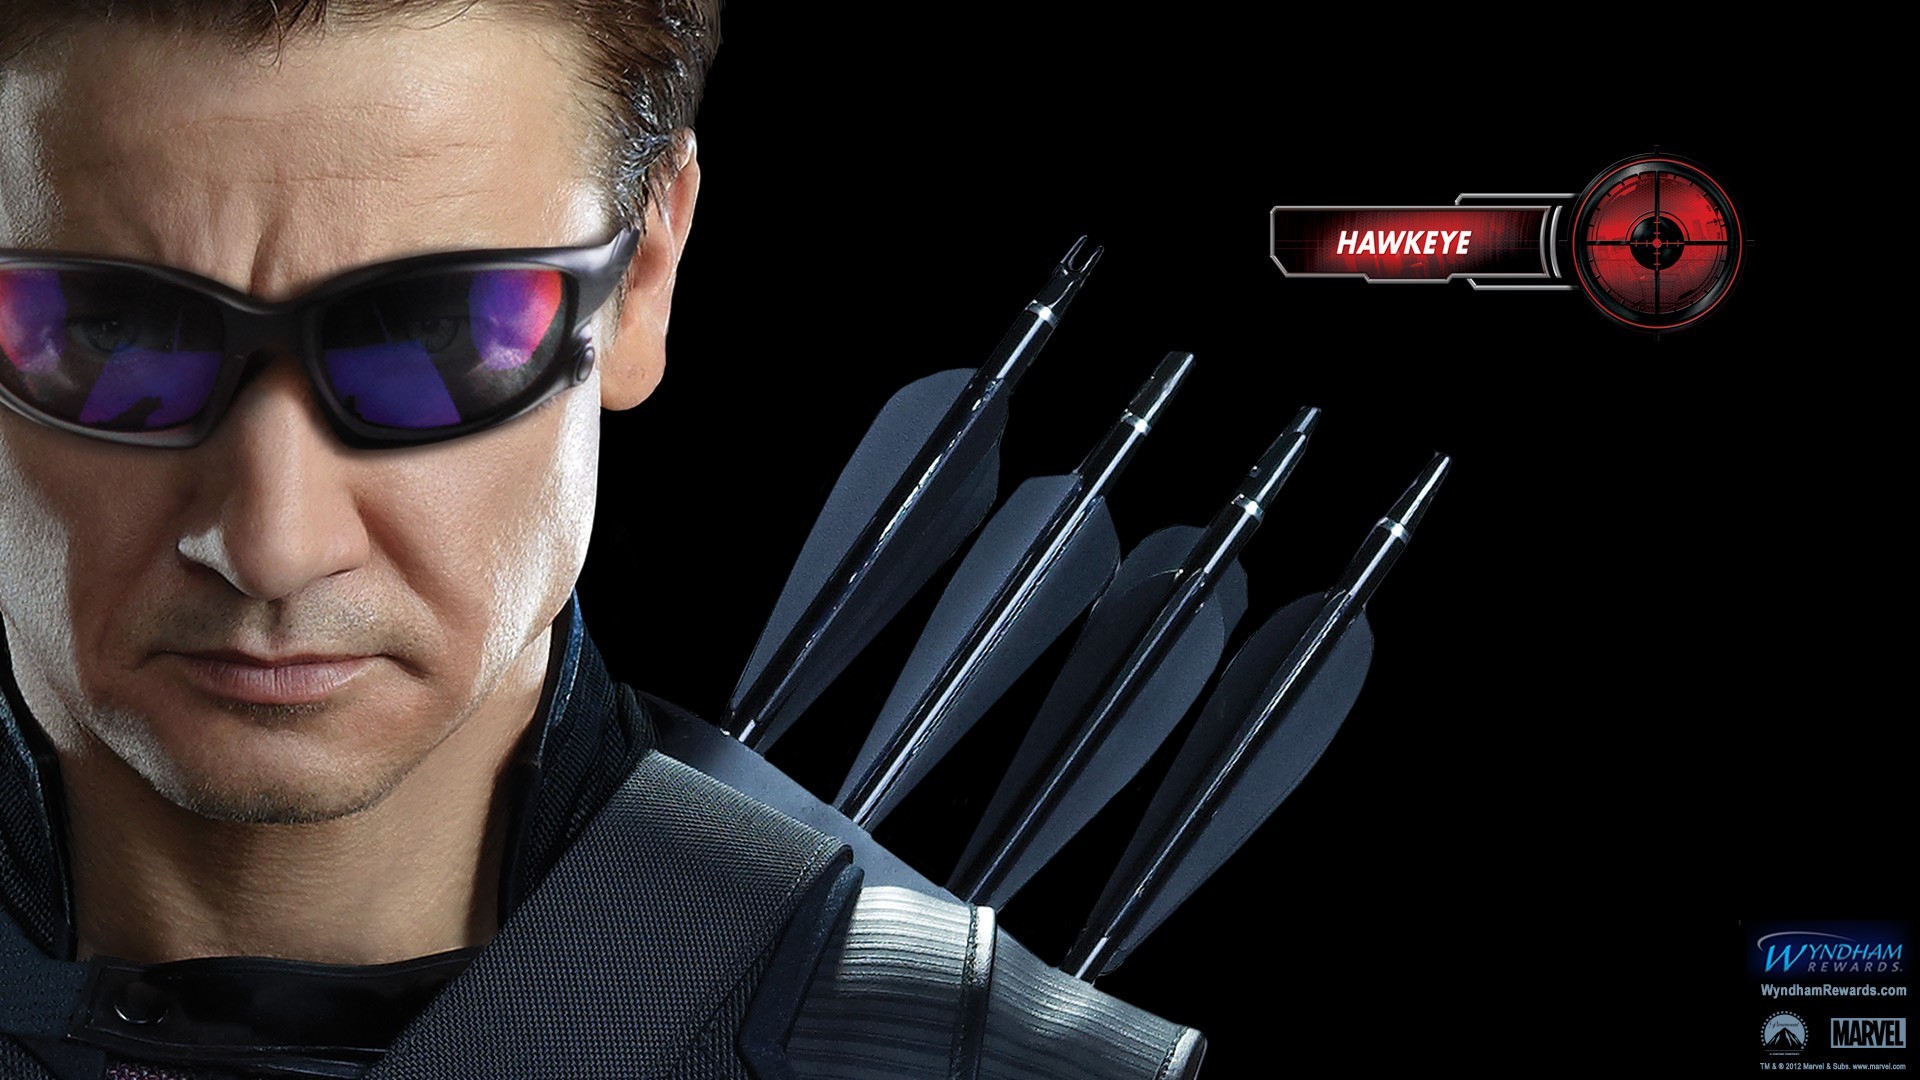 People 1920x1080 movies The Avengers Hawkeye Jeremy Renner Clint Barton Marvel Cinematic Universe men